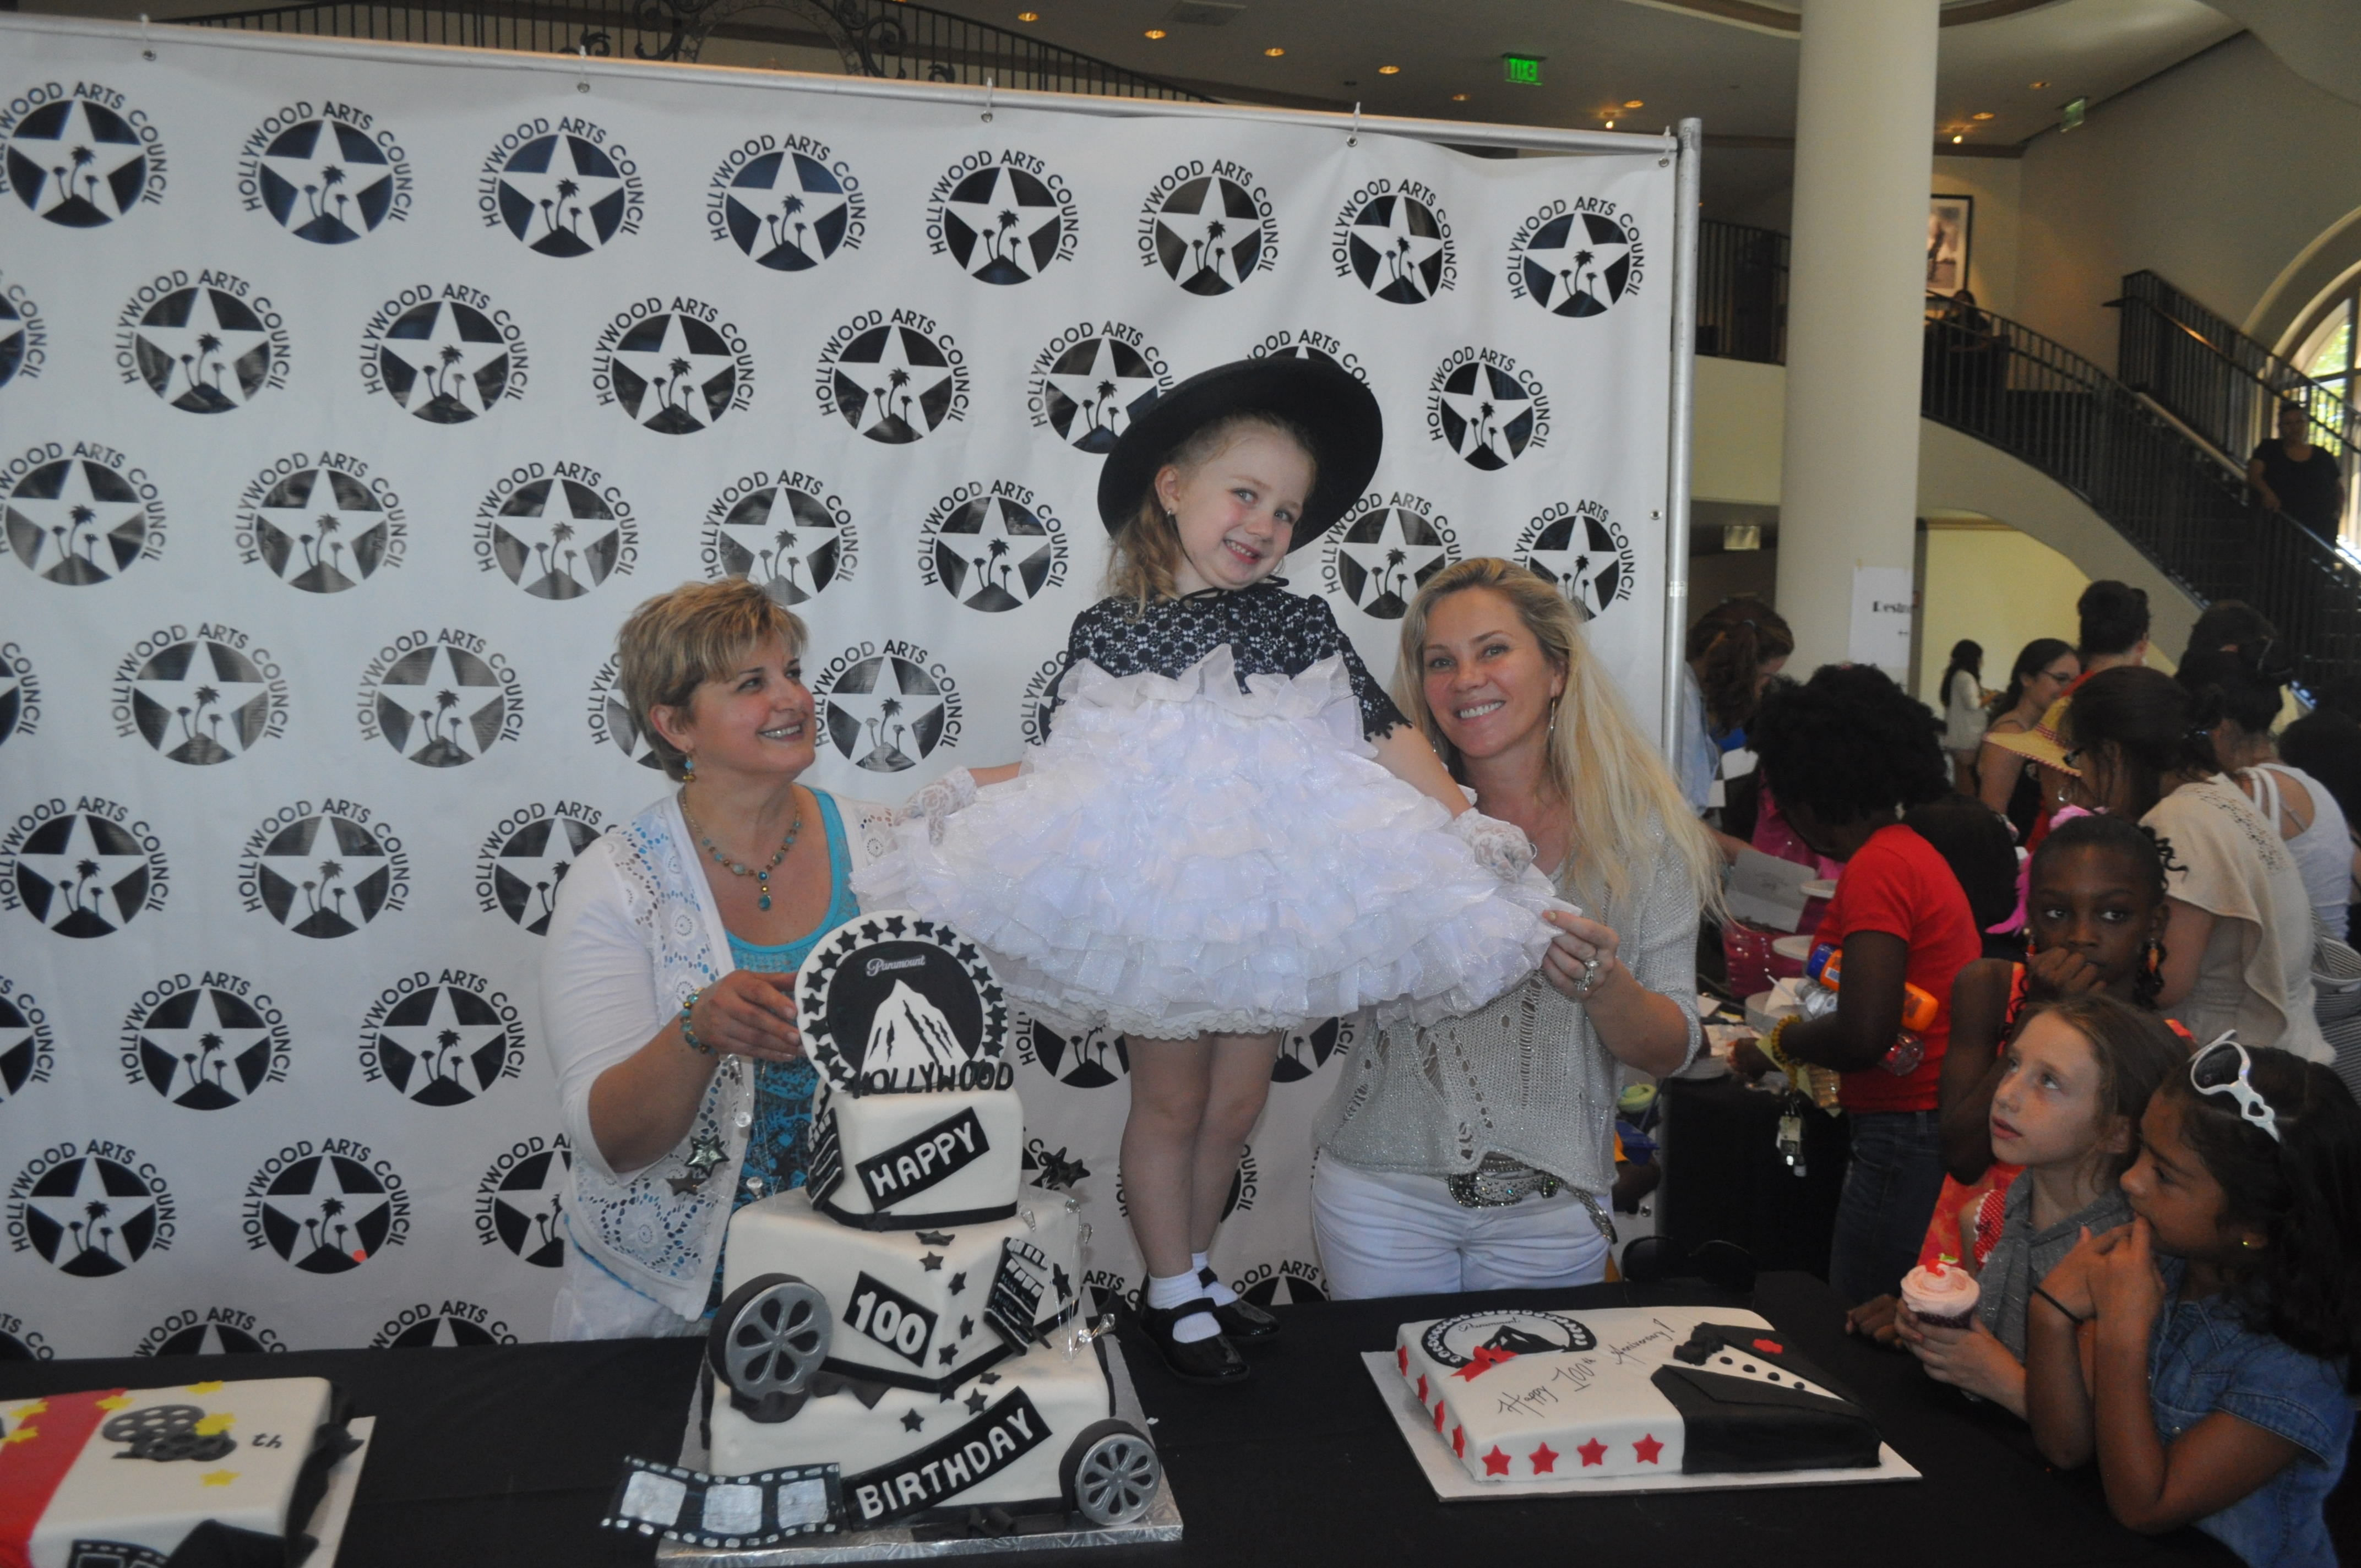 RJ, The Paramount Pictures 100s Aniversary Birthday Cake and Miss Jovina the Owner of 